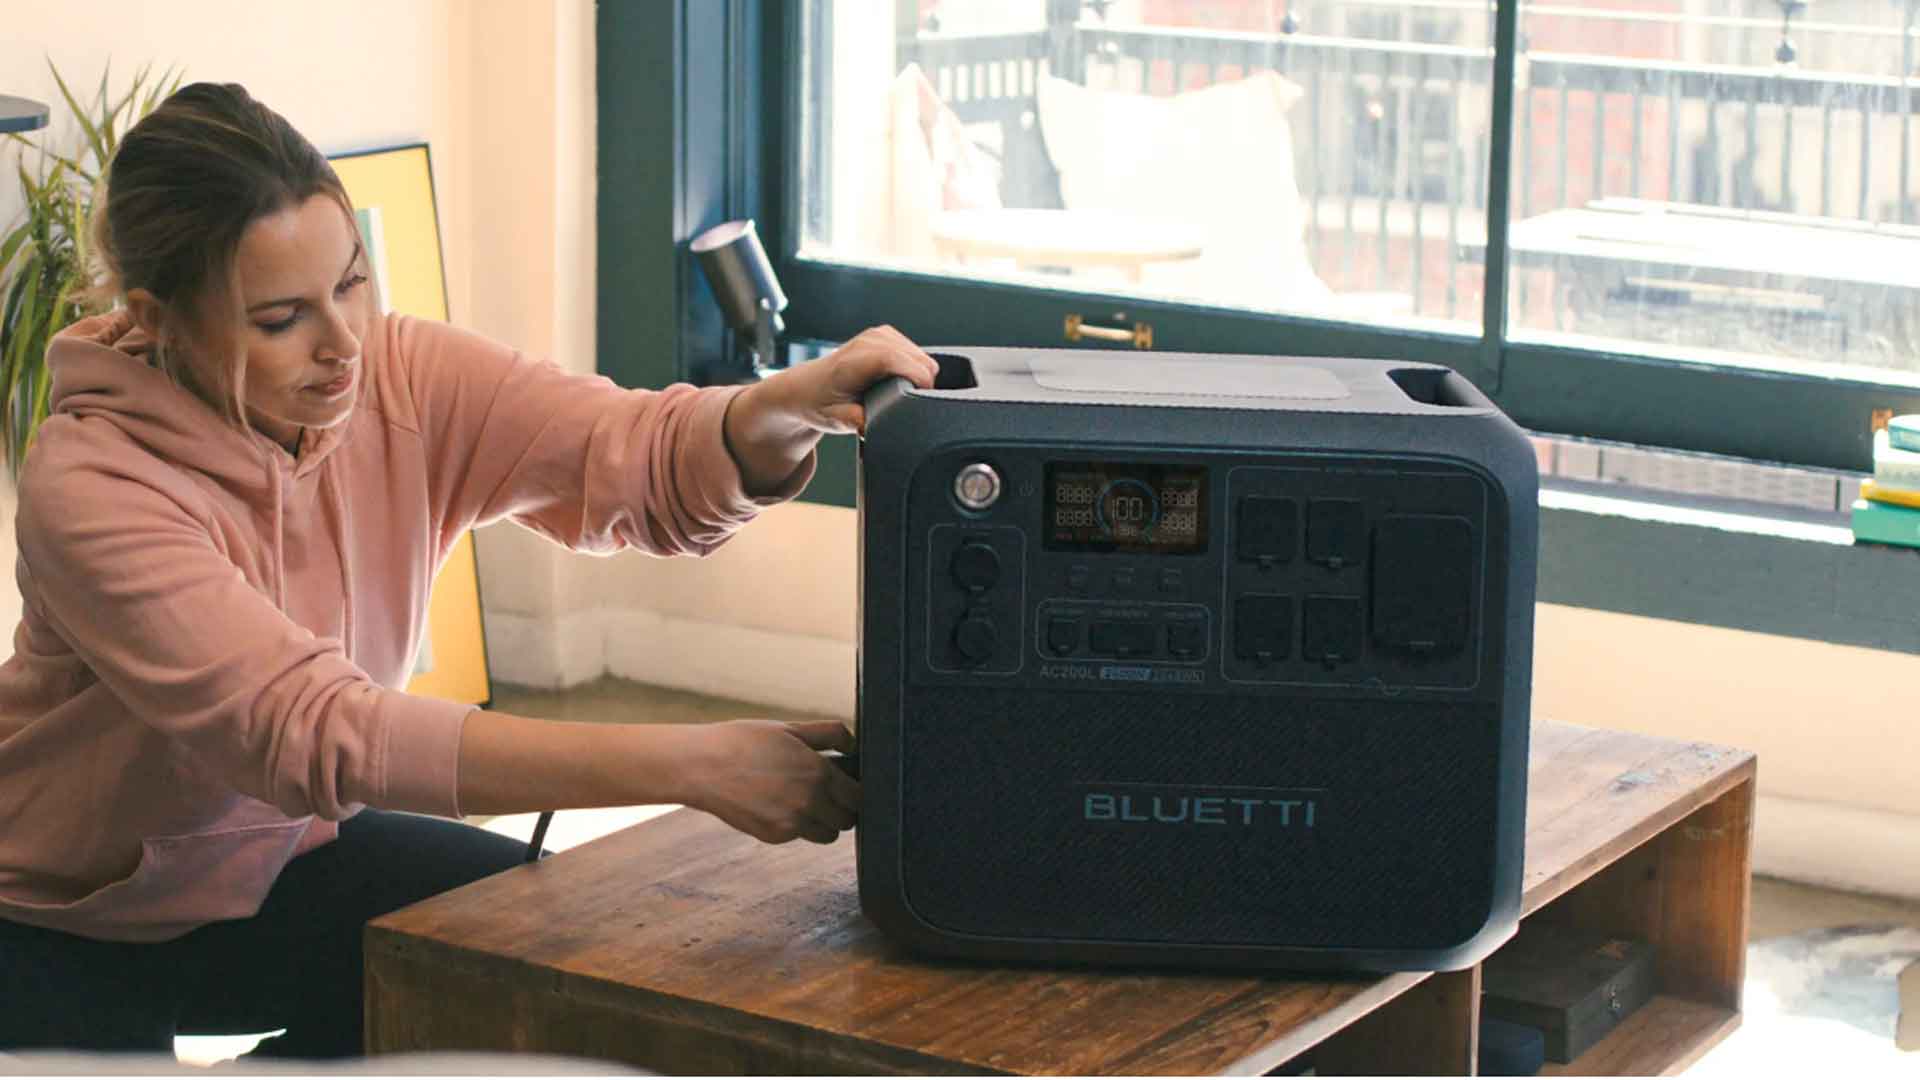 BLUETTI AC200L portable power station review, features, specs, price deal